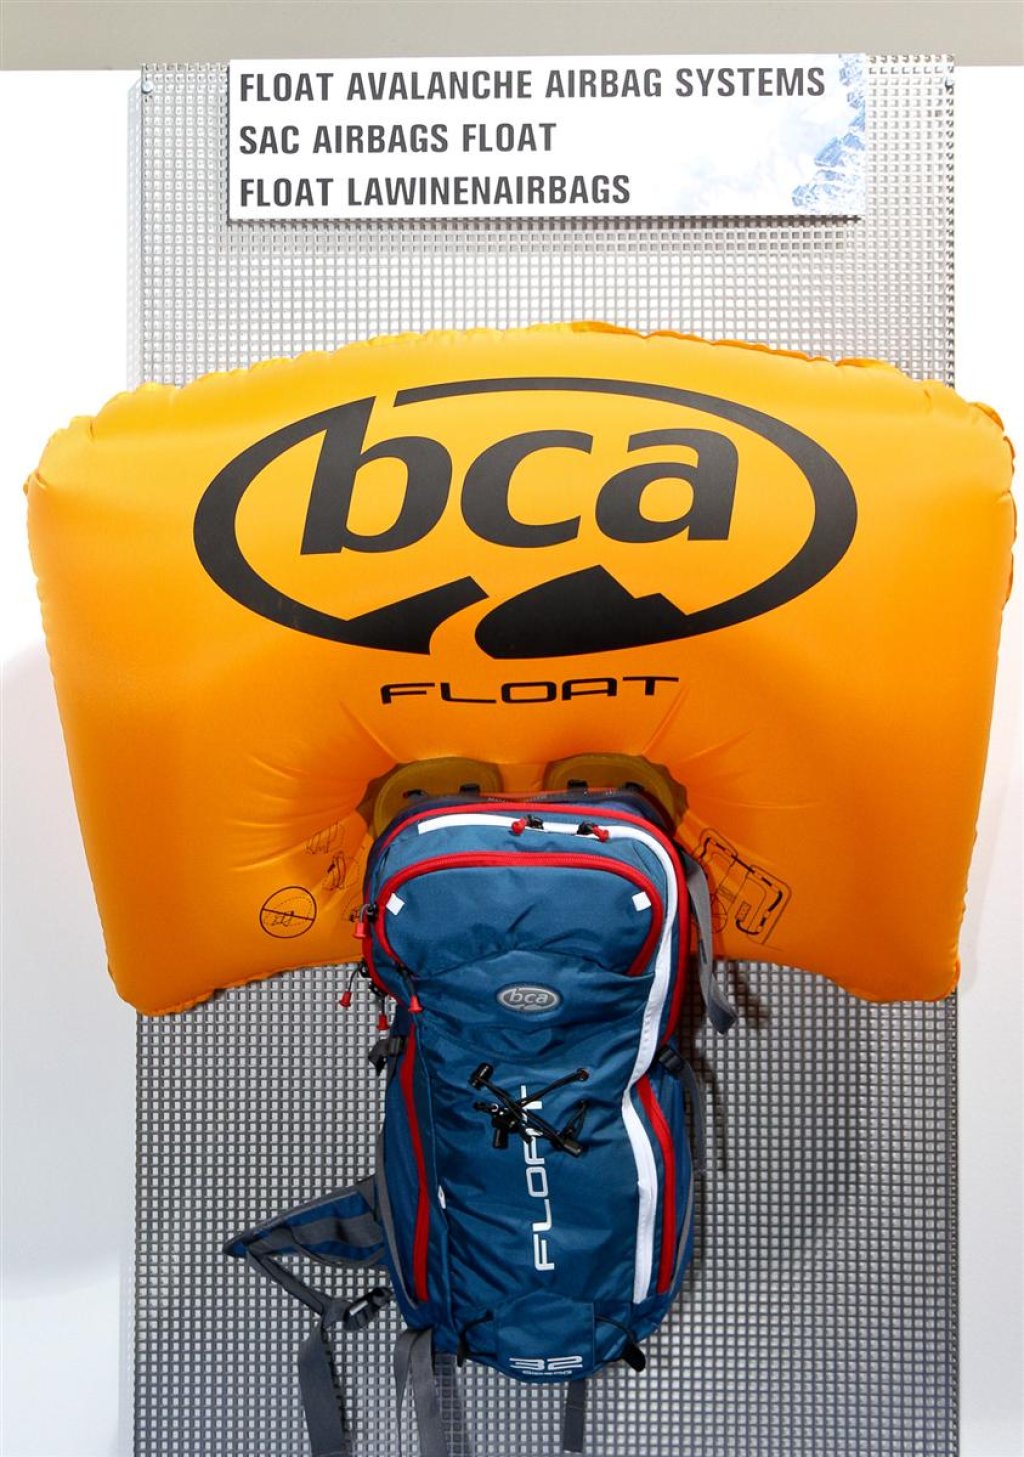 BCA: The third airbag system on the European market. Here the Float 32